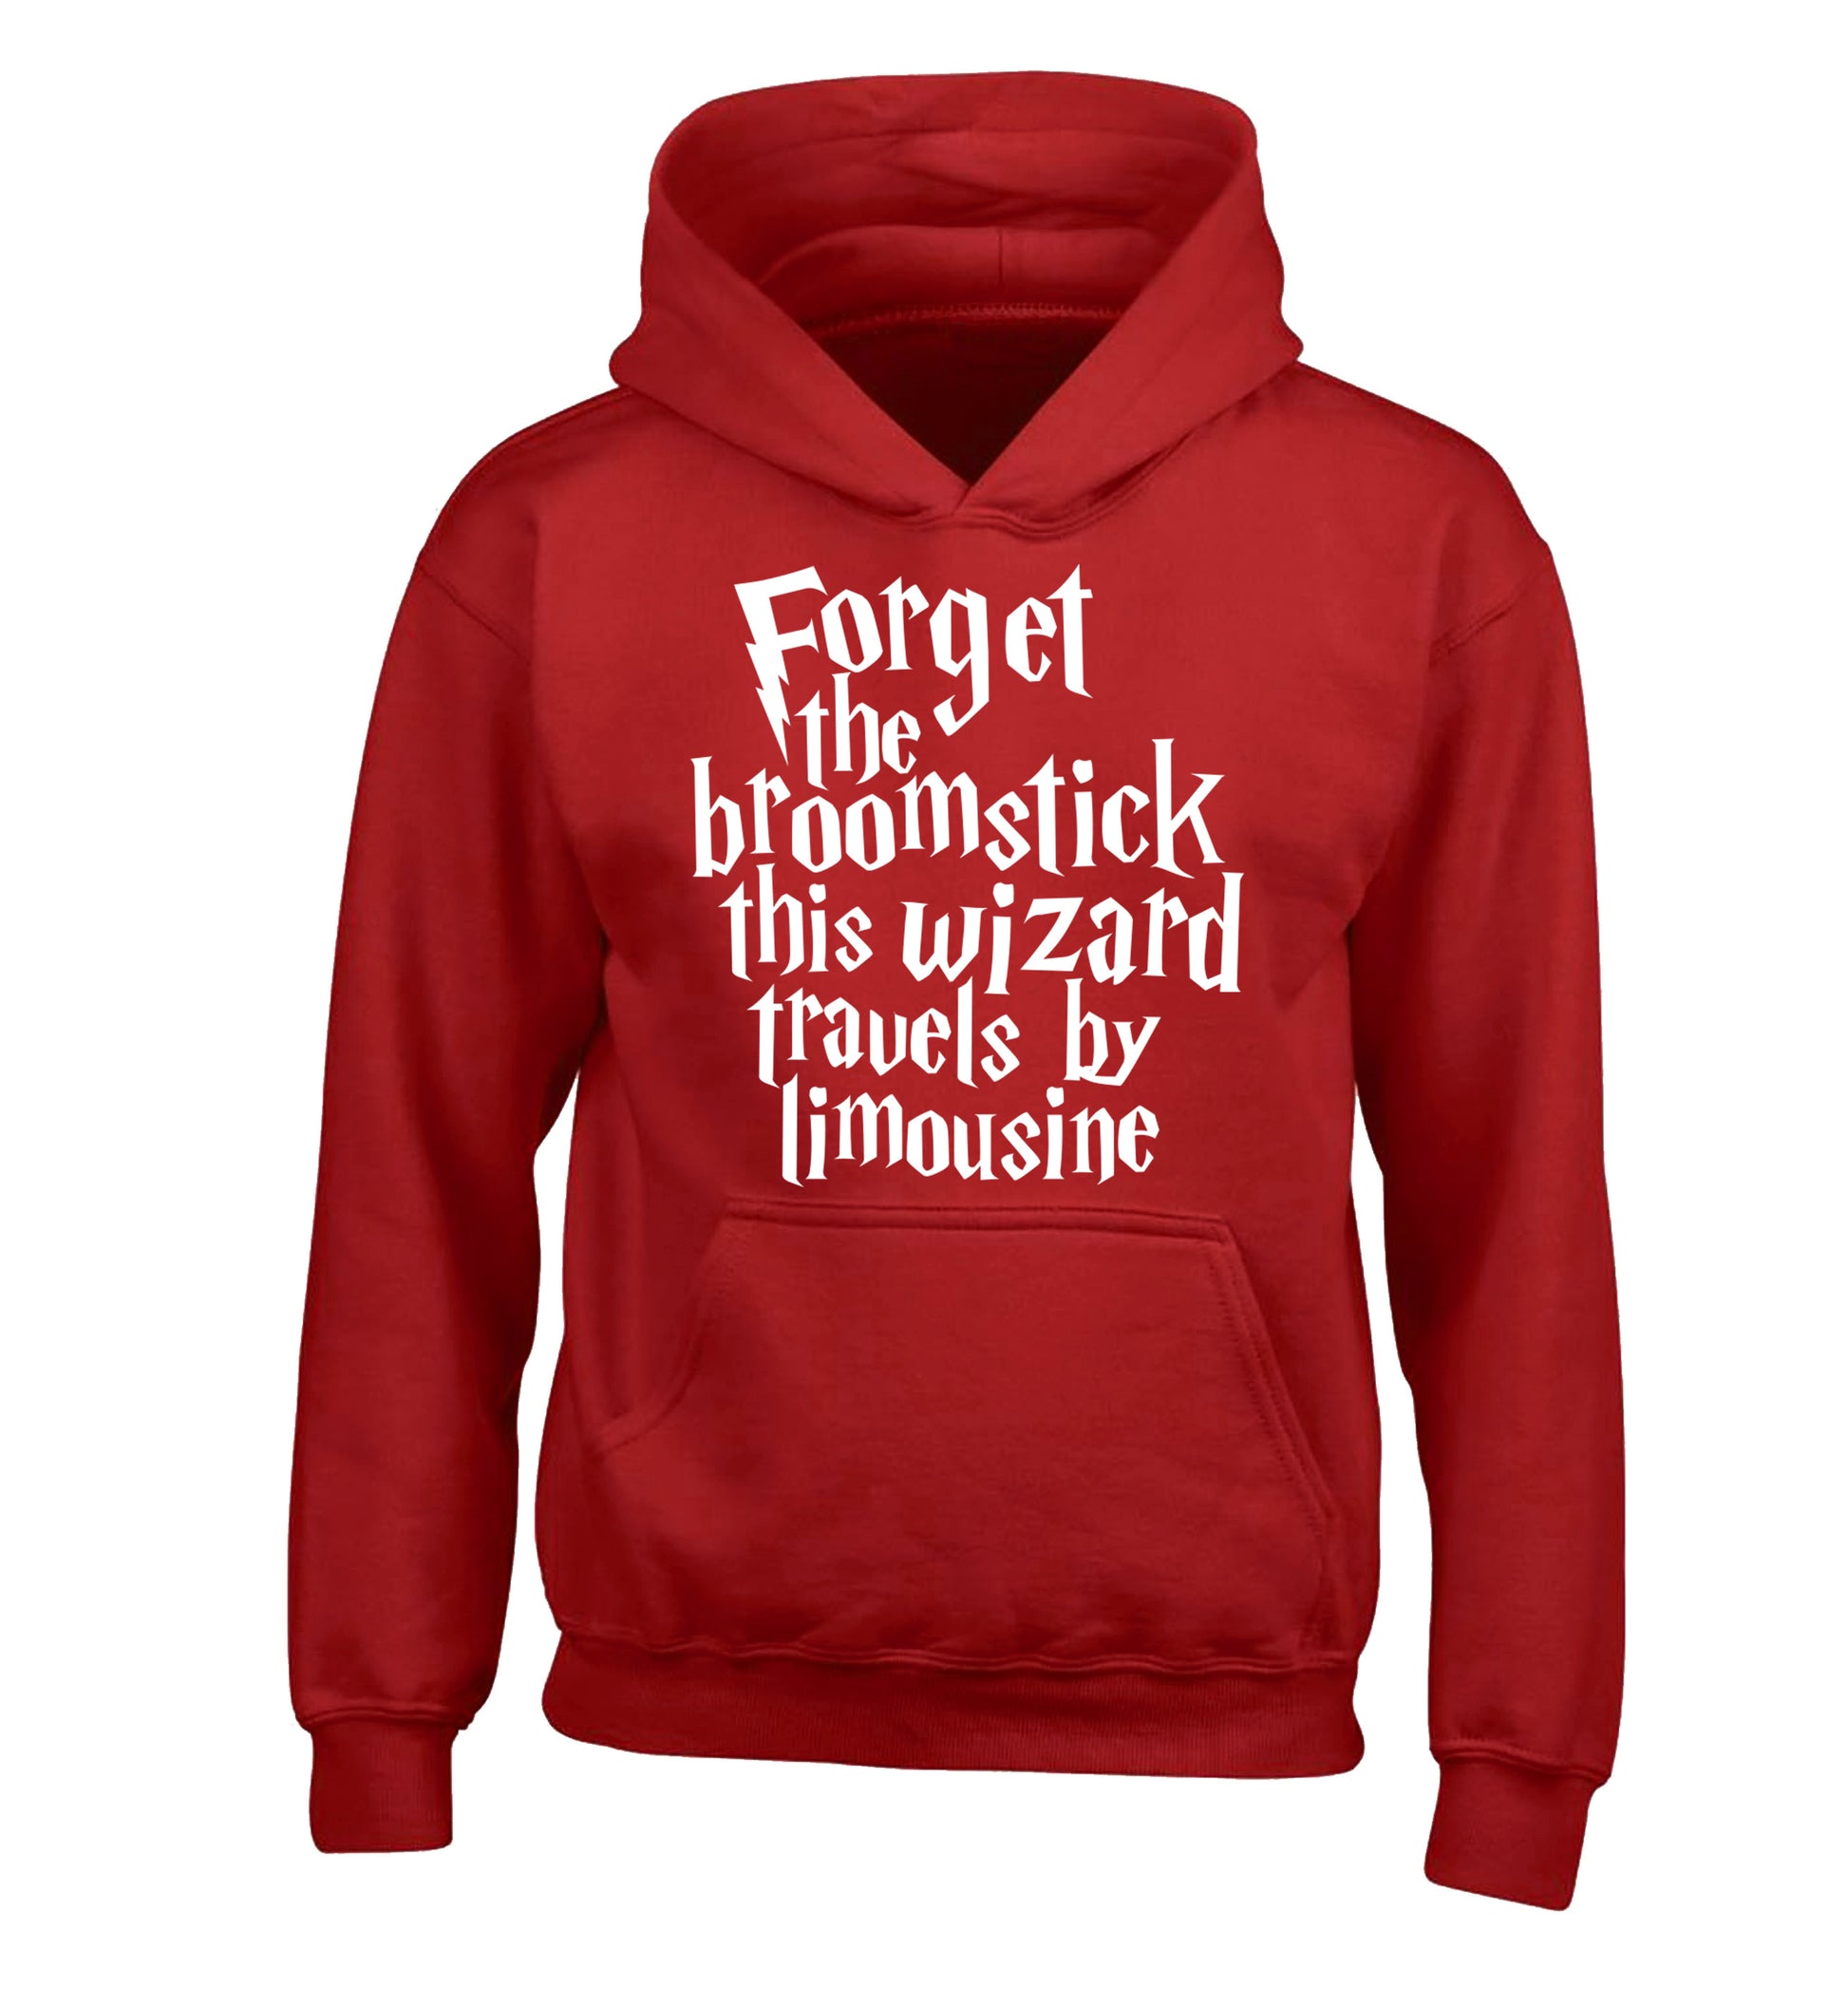 Forget the broomstick this wizard travels by limousine children's red hoodie 12-14 Years